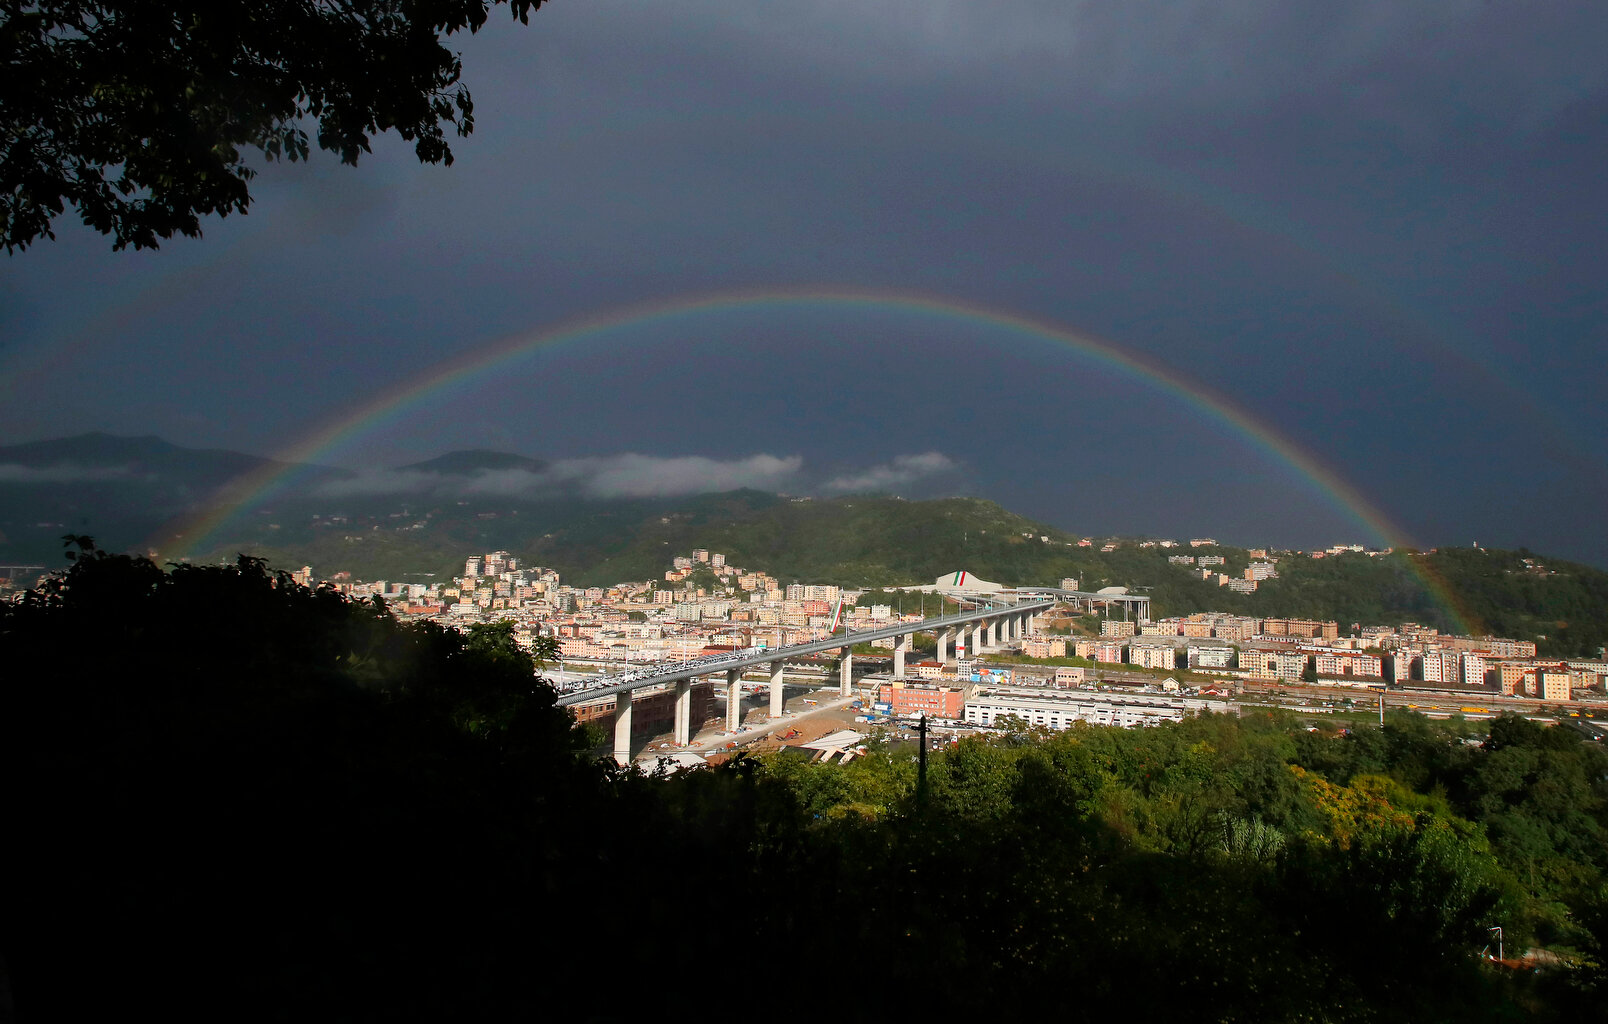  A rainbow shines over the new San Giorgio Bridge in Genoa, Italy, Monday, Aug. 3, 2020. A large section of the old Morandi bridge collapsed on Aug. 14, 2018, killing 43 people and forcing the evacuation of nearby residents from the densely built-up 